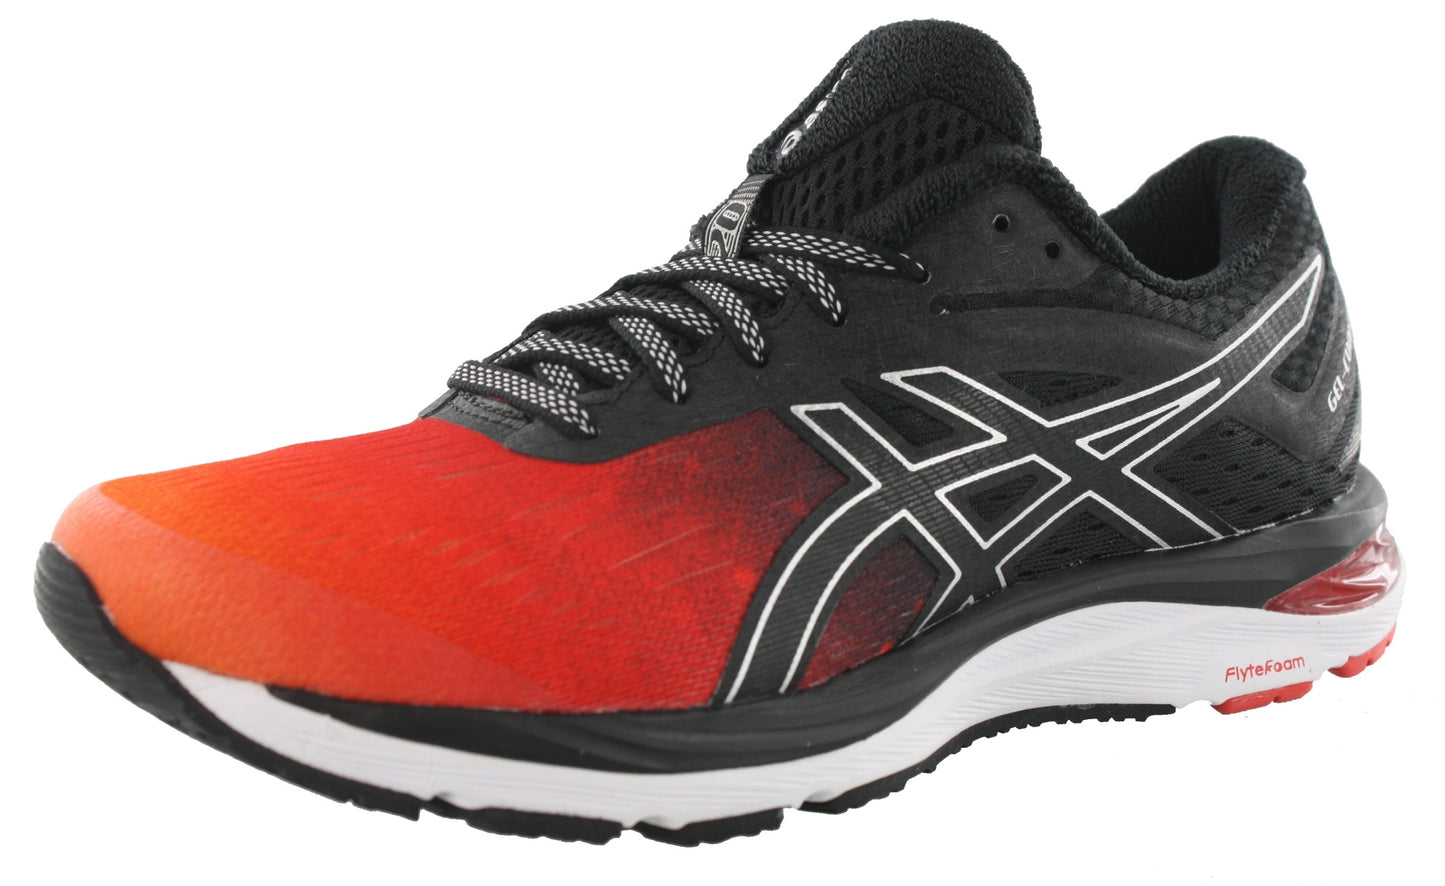 Lateral of Burgundy / Black137 ASICS Men Gel Cumulus 20 SP Cushioned Running Shoes